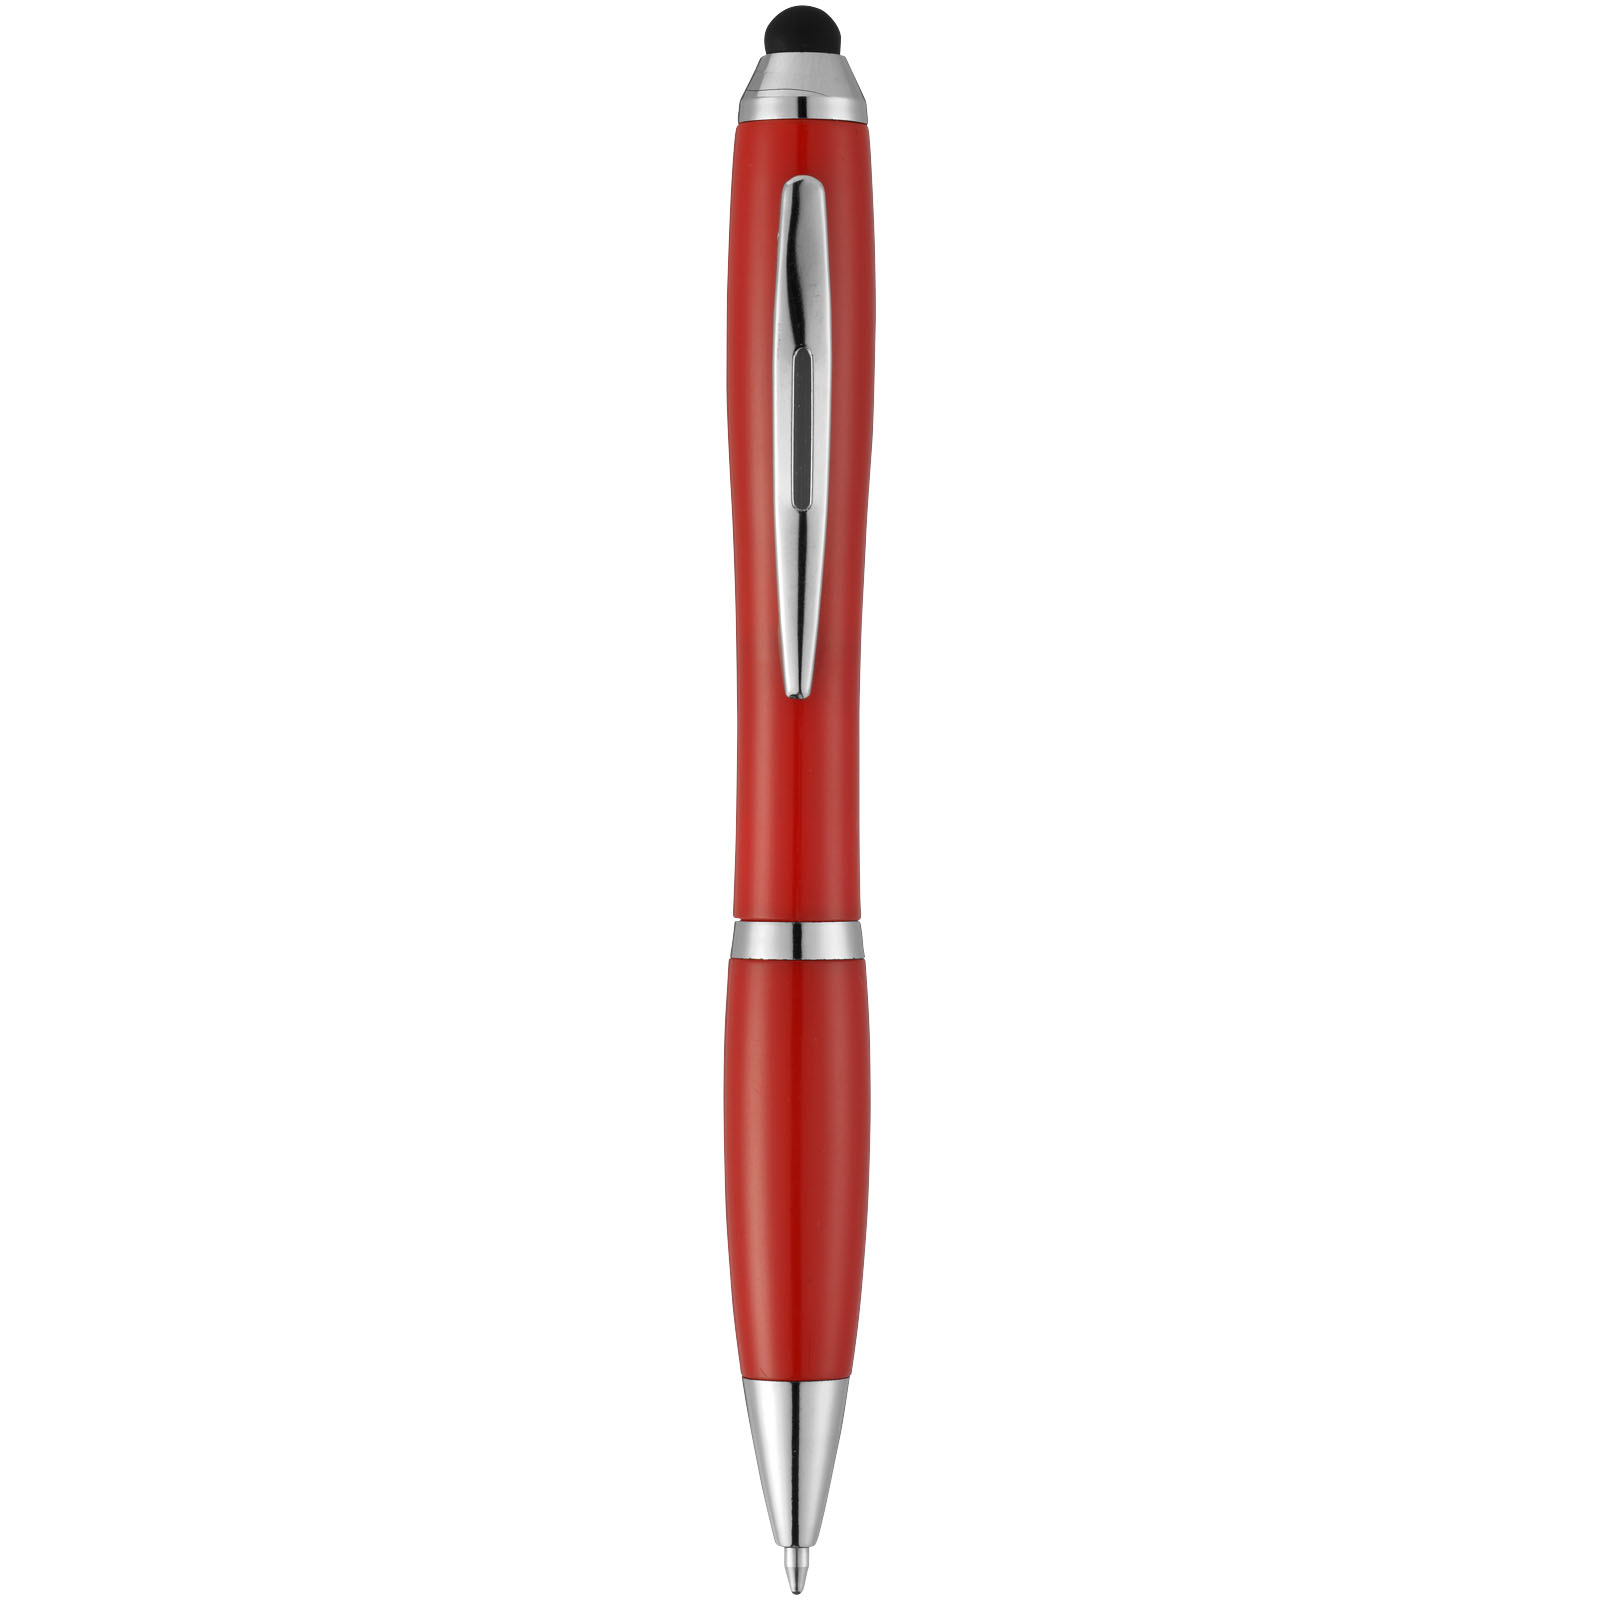 Stylos-bille publicitaires - Stylo stylet Nash - 1